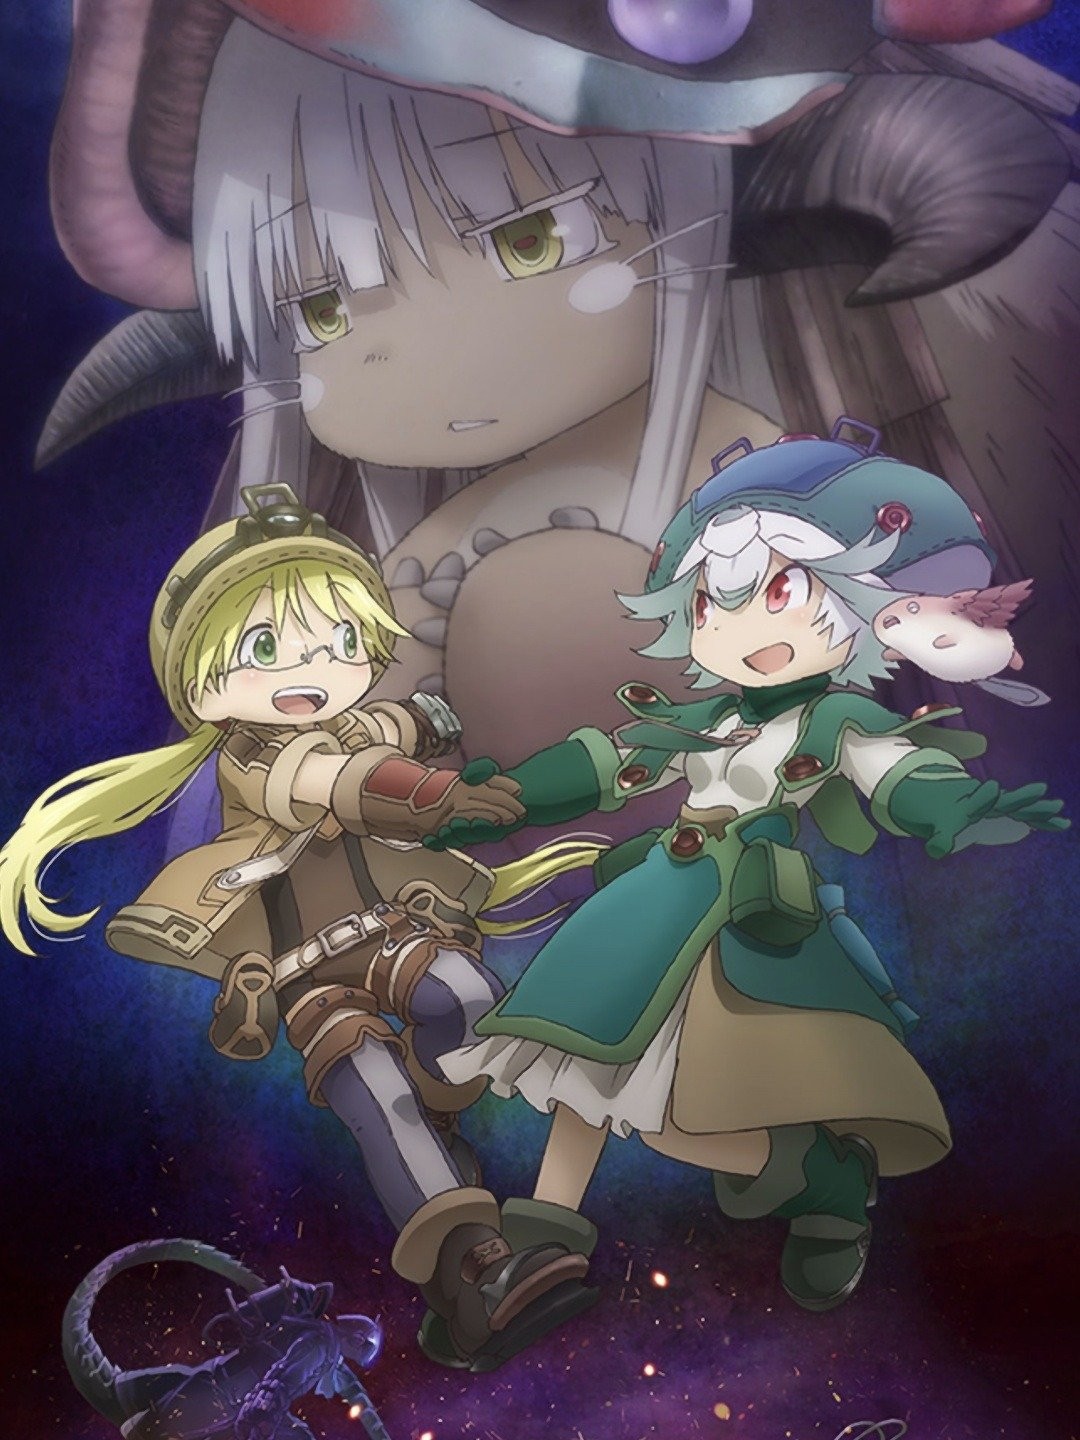 Made in Abyss: Dawn of the Deep Soul Review: A Must-See Sequel for Fans